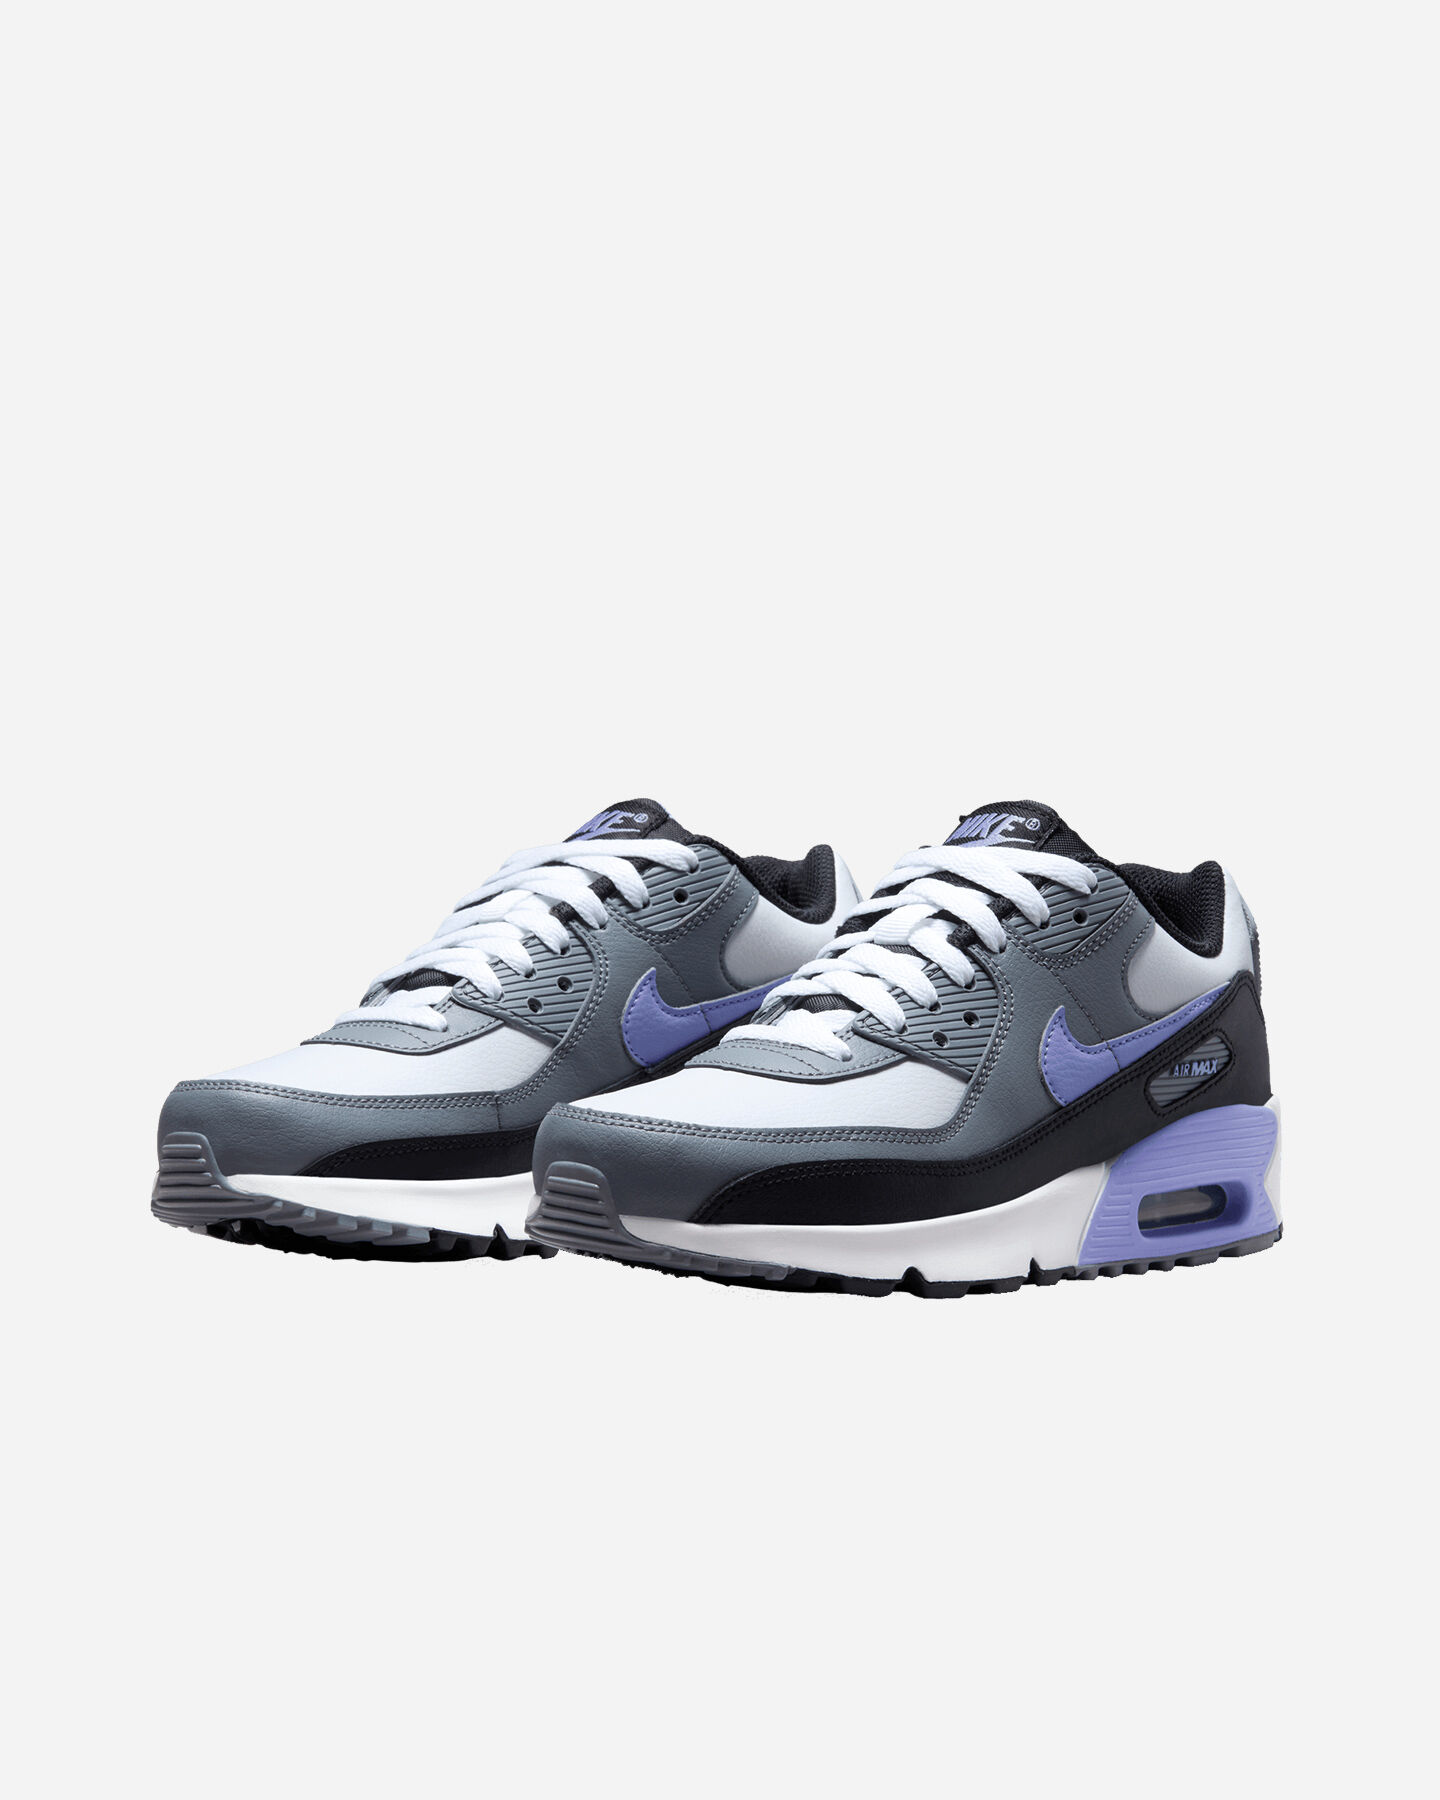  Scarpe sneakers NIKE AIR MAX 90 LTR GS JR S5599872|001|4Y scatto 1